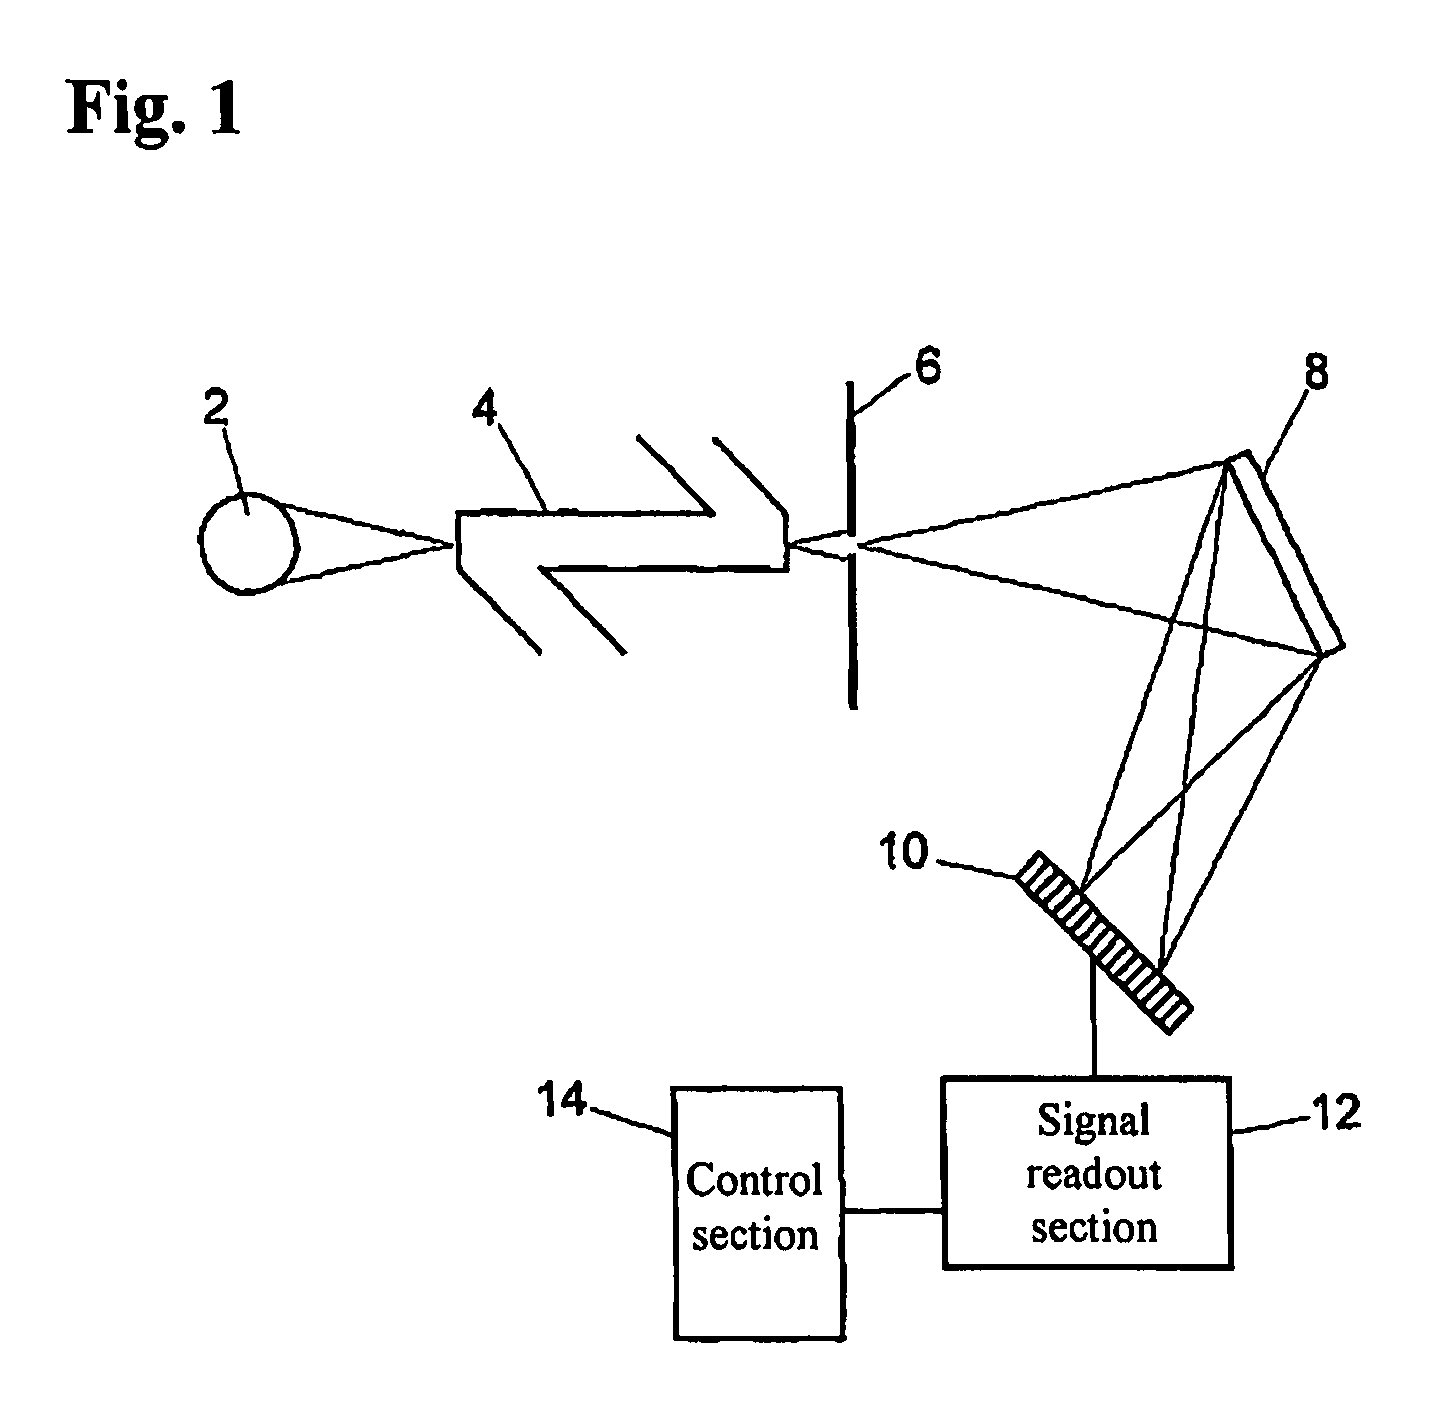 Spectrophotometer with optical system for spectrally dispersing measurement light and photodiode array